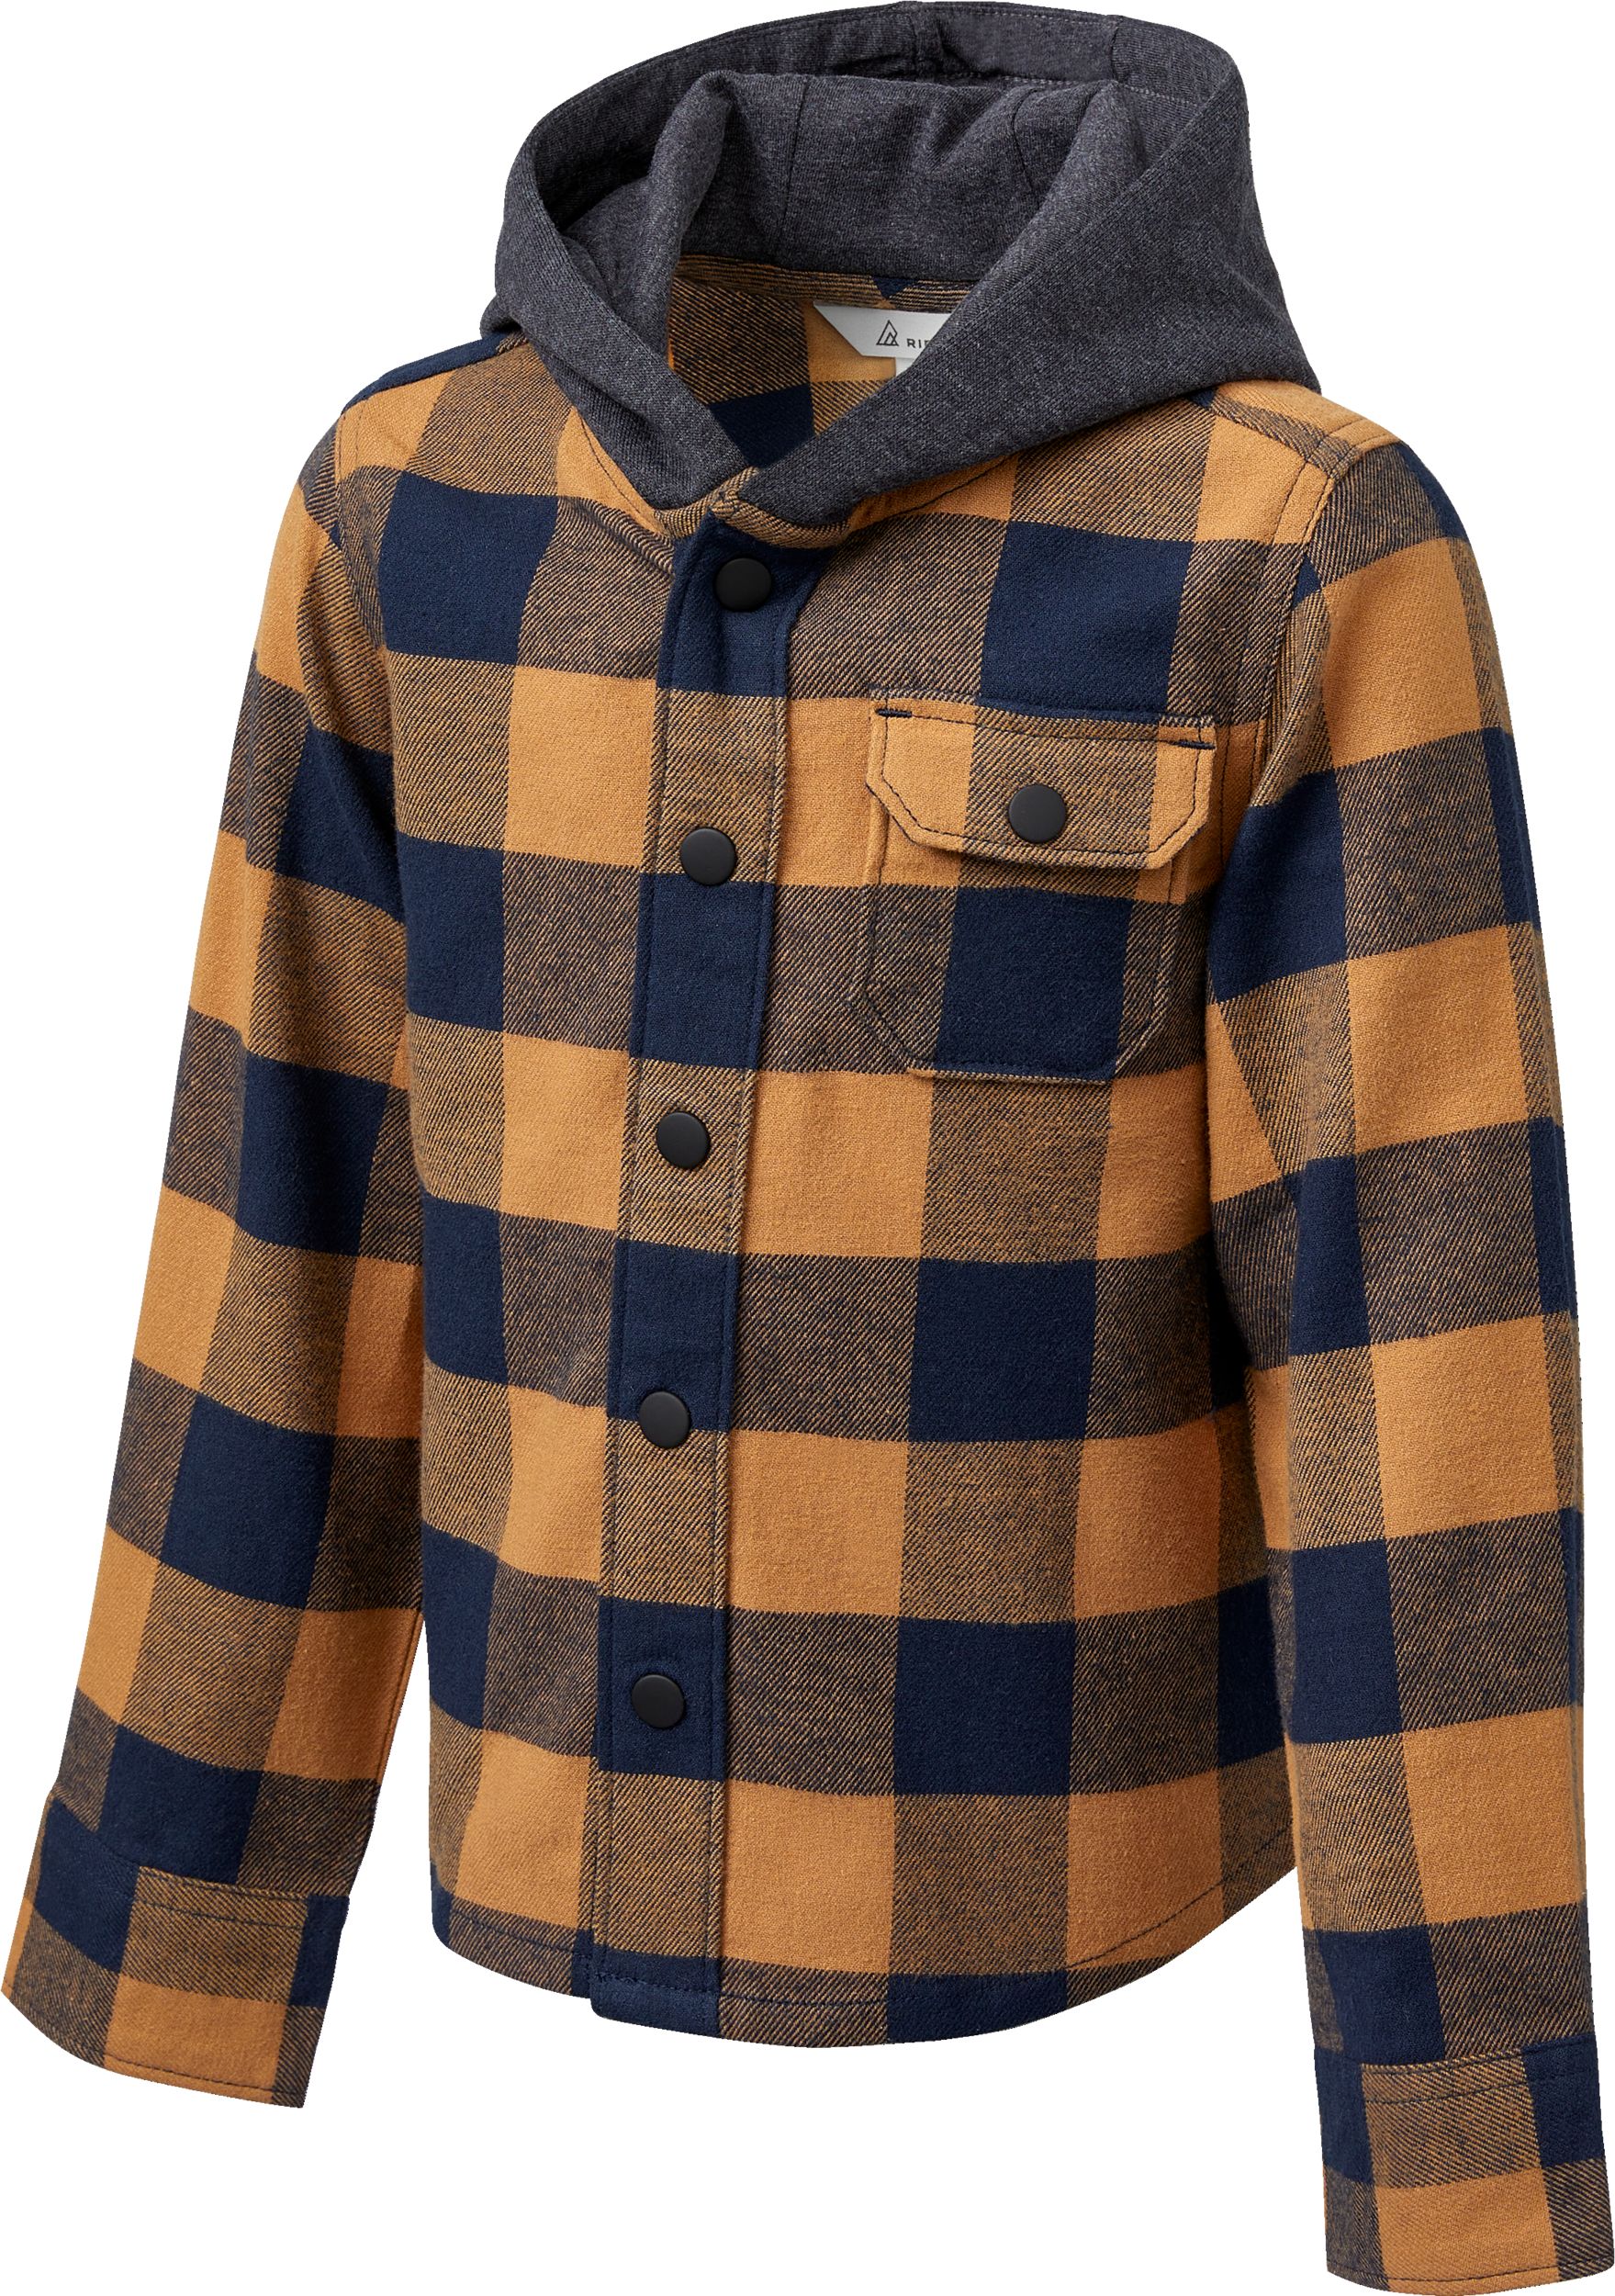 Image of Ripzone Toddler Boys' 2-6 Hideout 2.0 Plaid Shirt